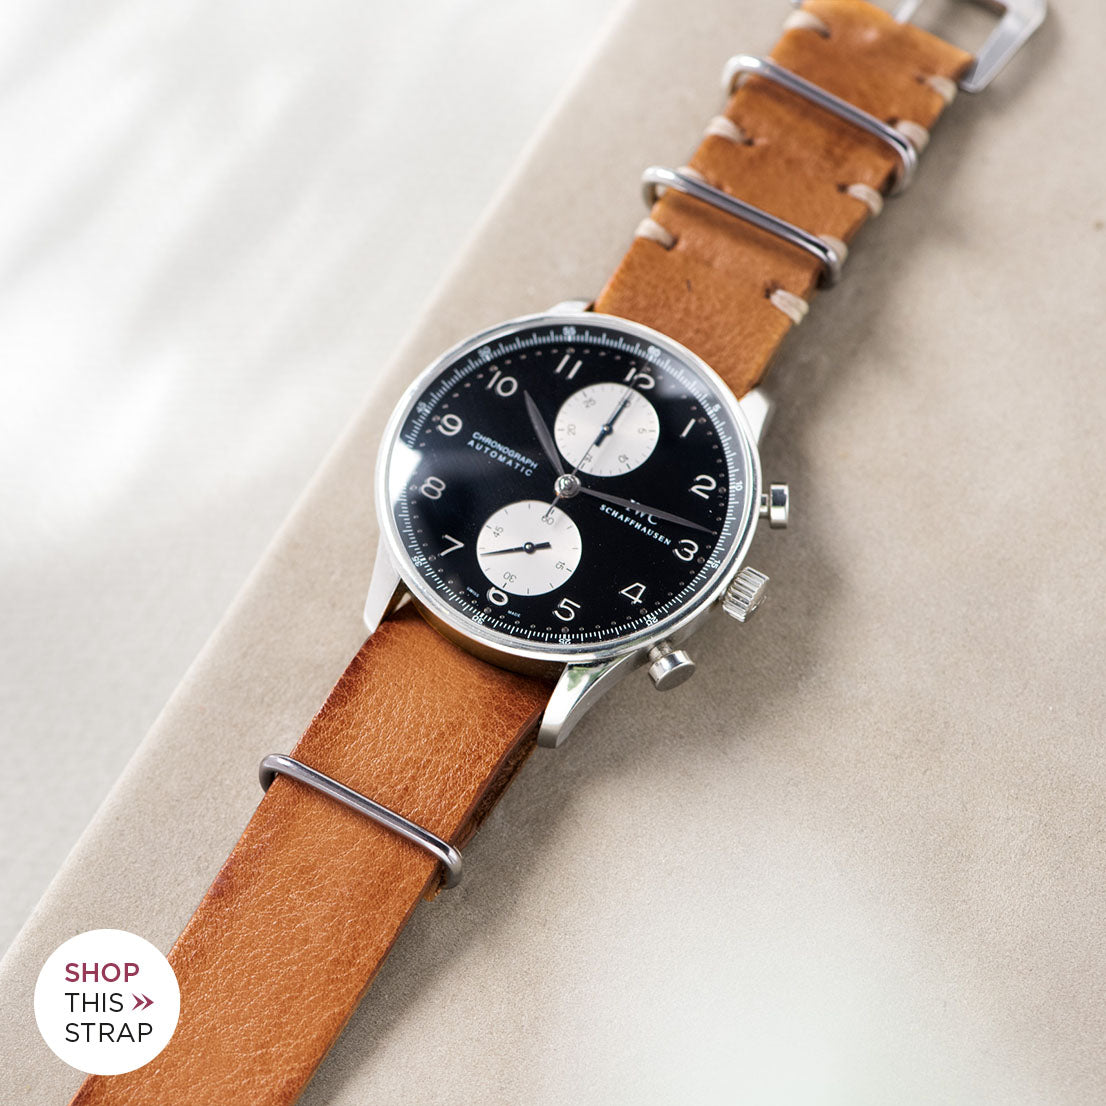 Bulang and Sons_Strap Guide_IWC-Portugieser_Caramel Brown Nato Leather Watch Strap